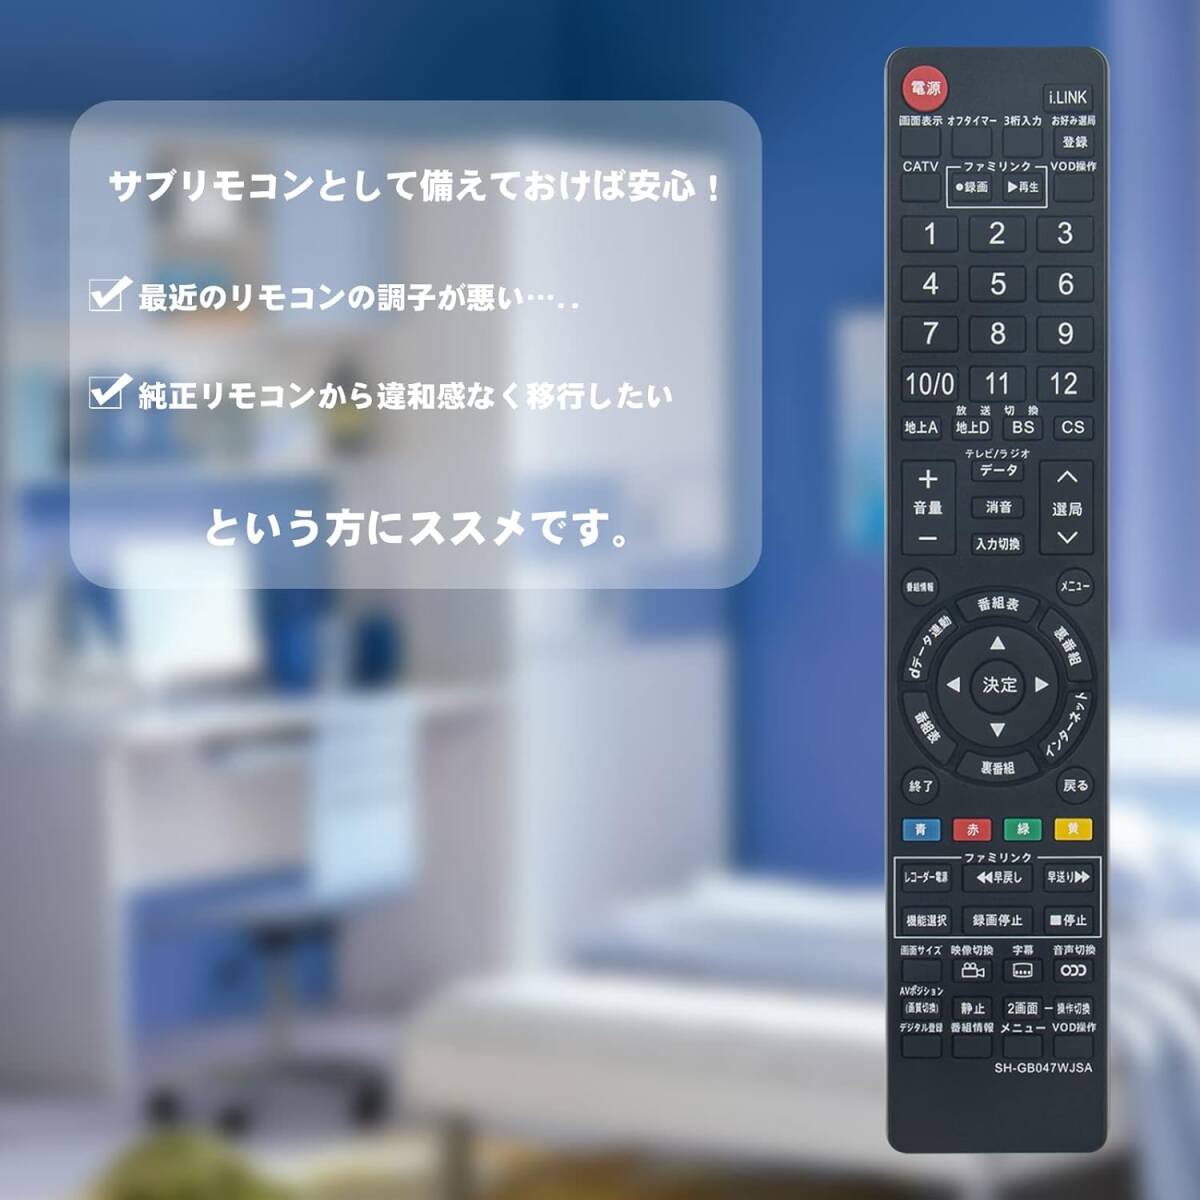 AULCMEET 液晶テレビ用リモコン fit for シャープGB047WJSA GA826WJSA GA716WJSA GA661WJSA GA615WJSA GA560WJSA GA560WJSB GA567WJSAなど_画像2